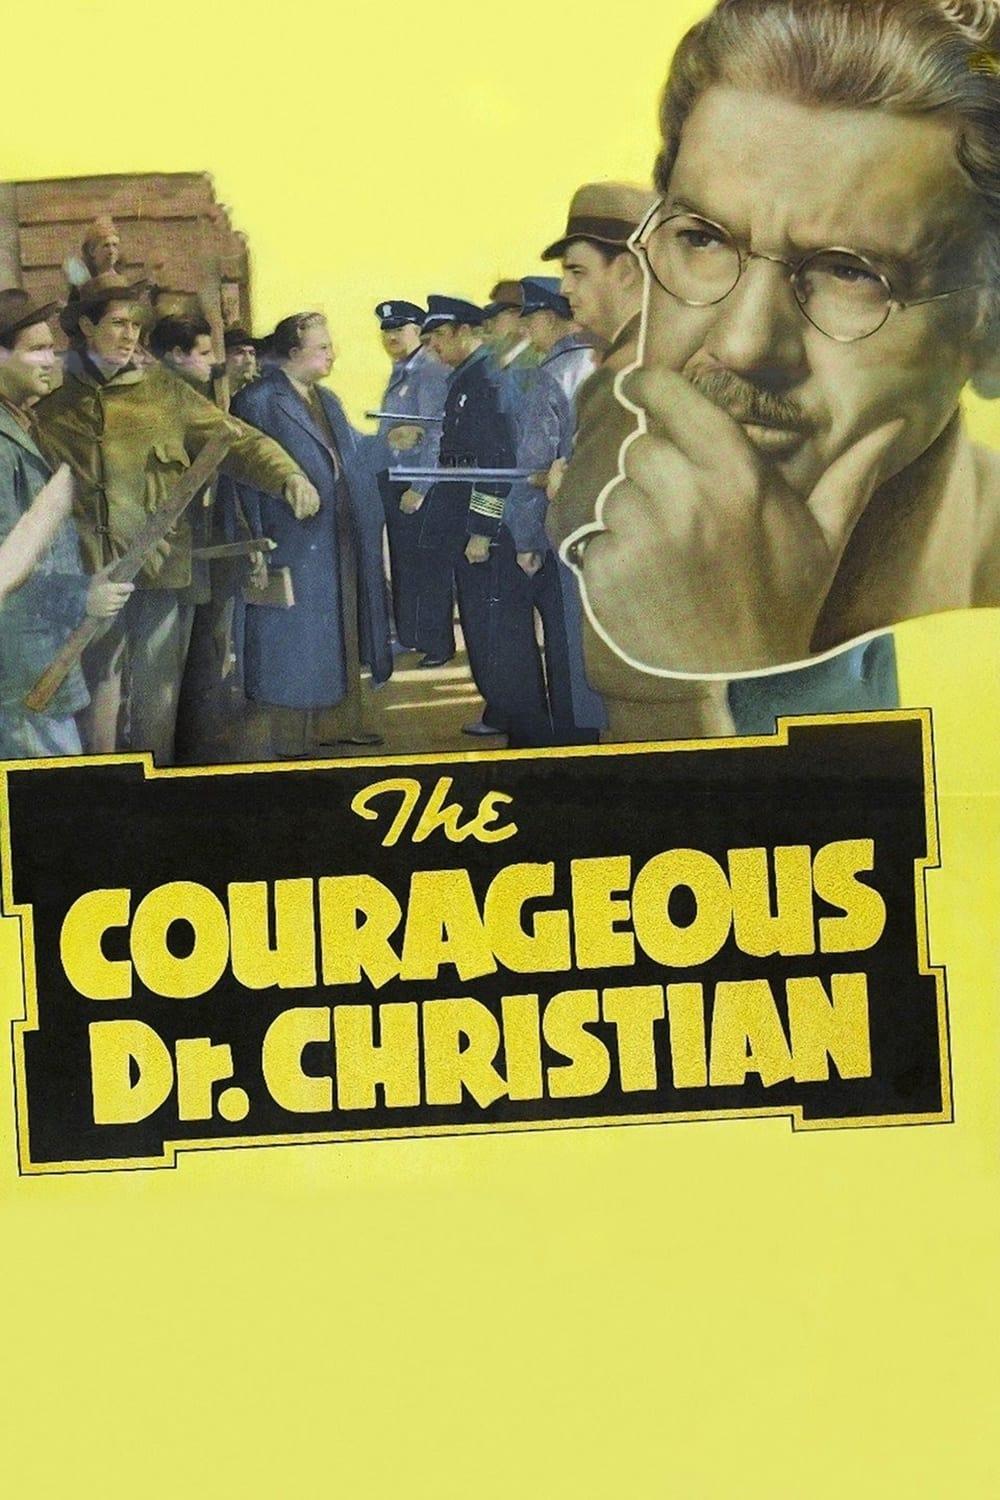 The Courageous Dr. Christian poster